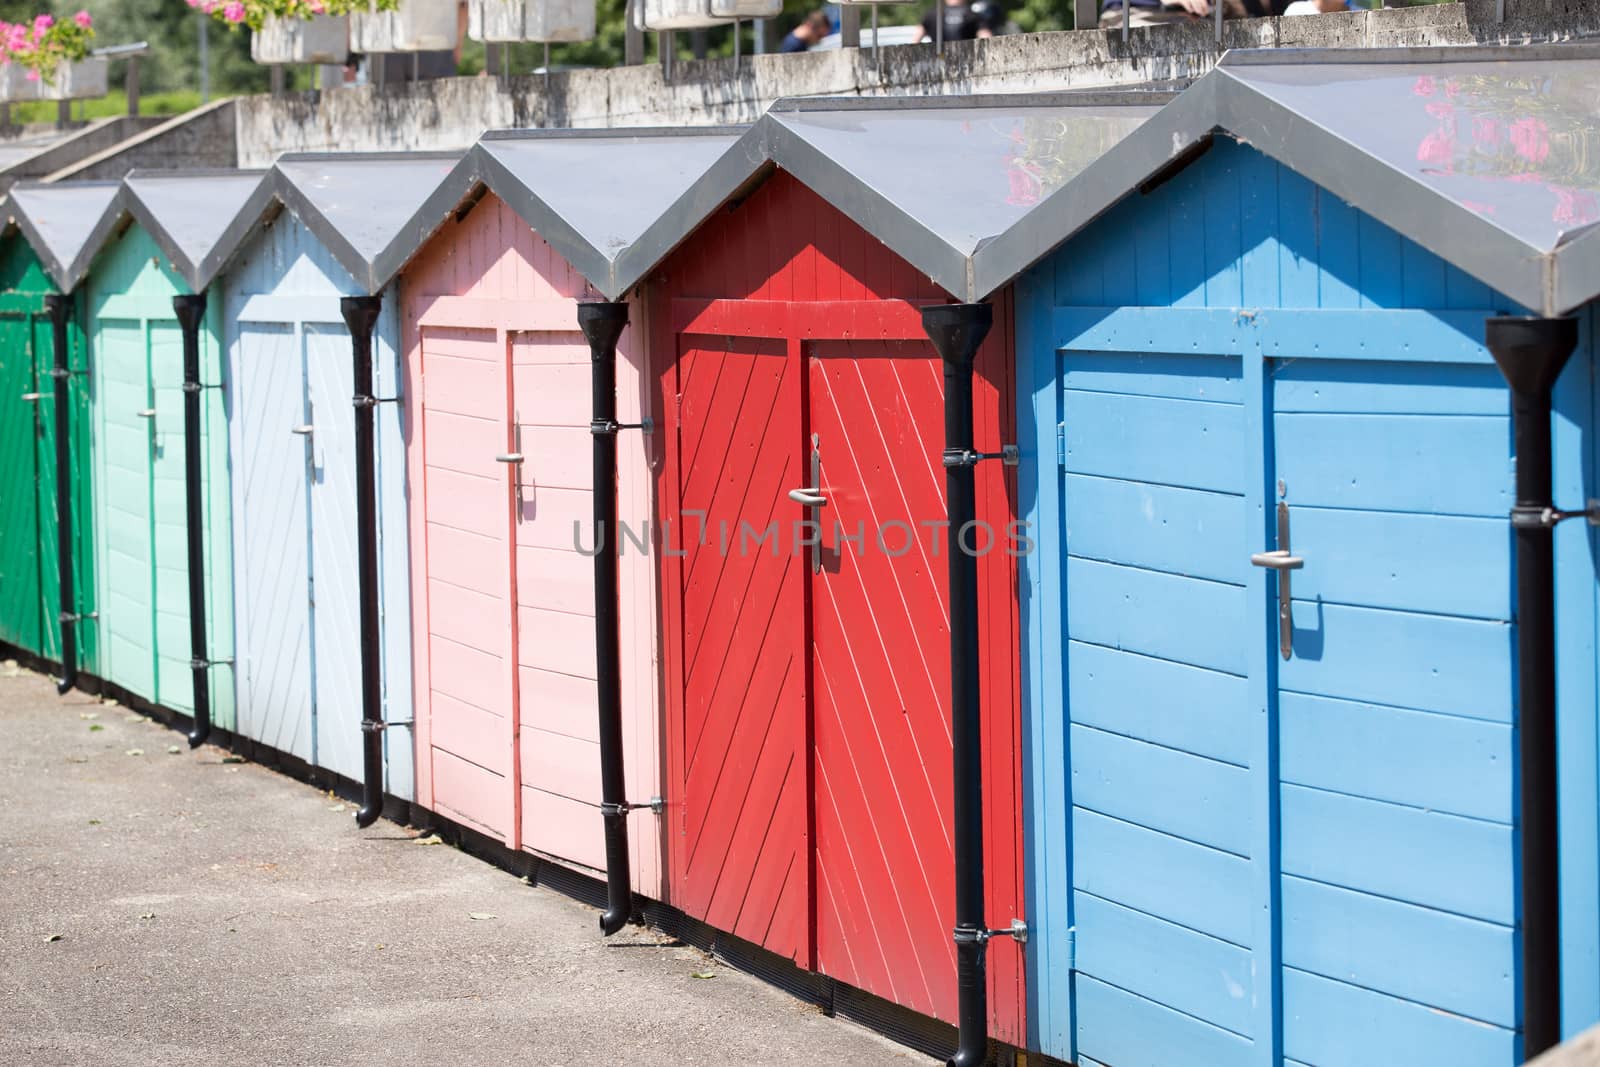 Row of colored beach huts in sunny day.